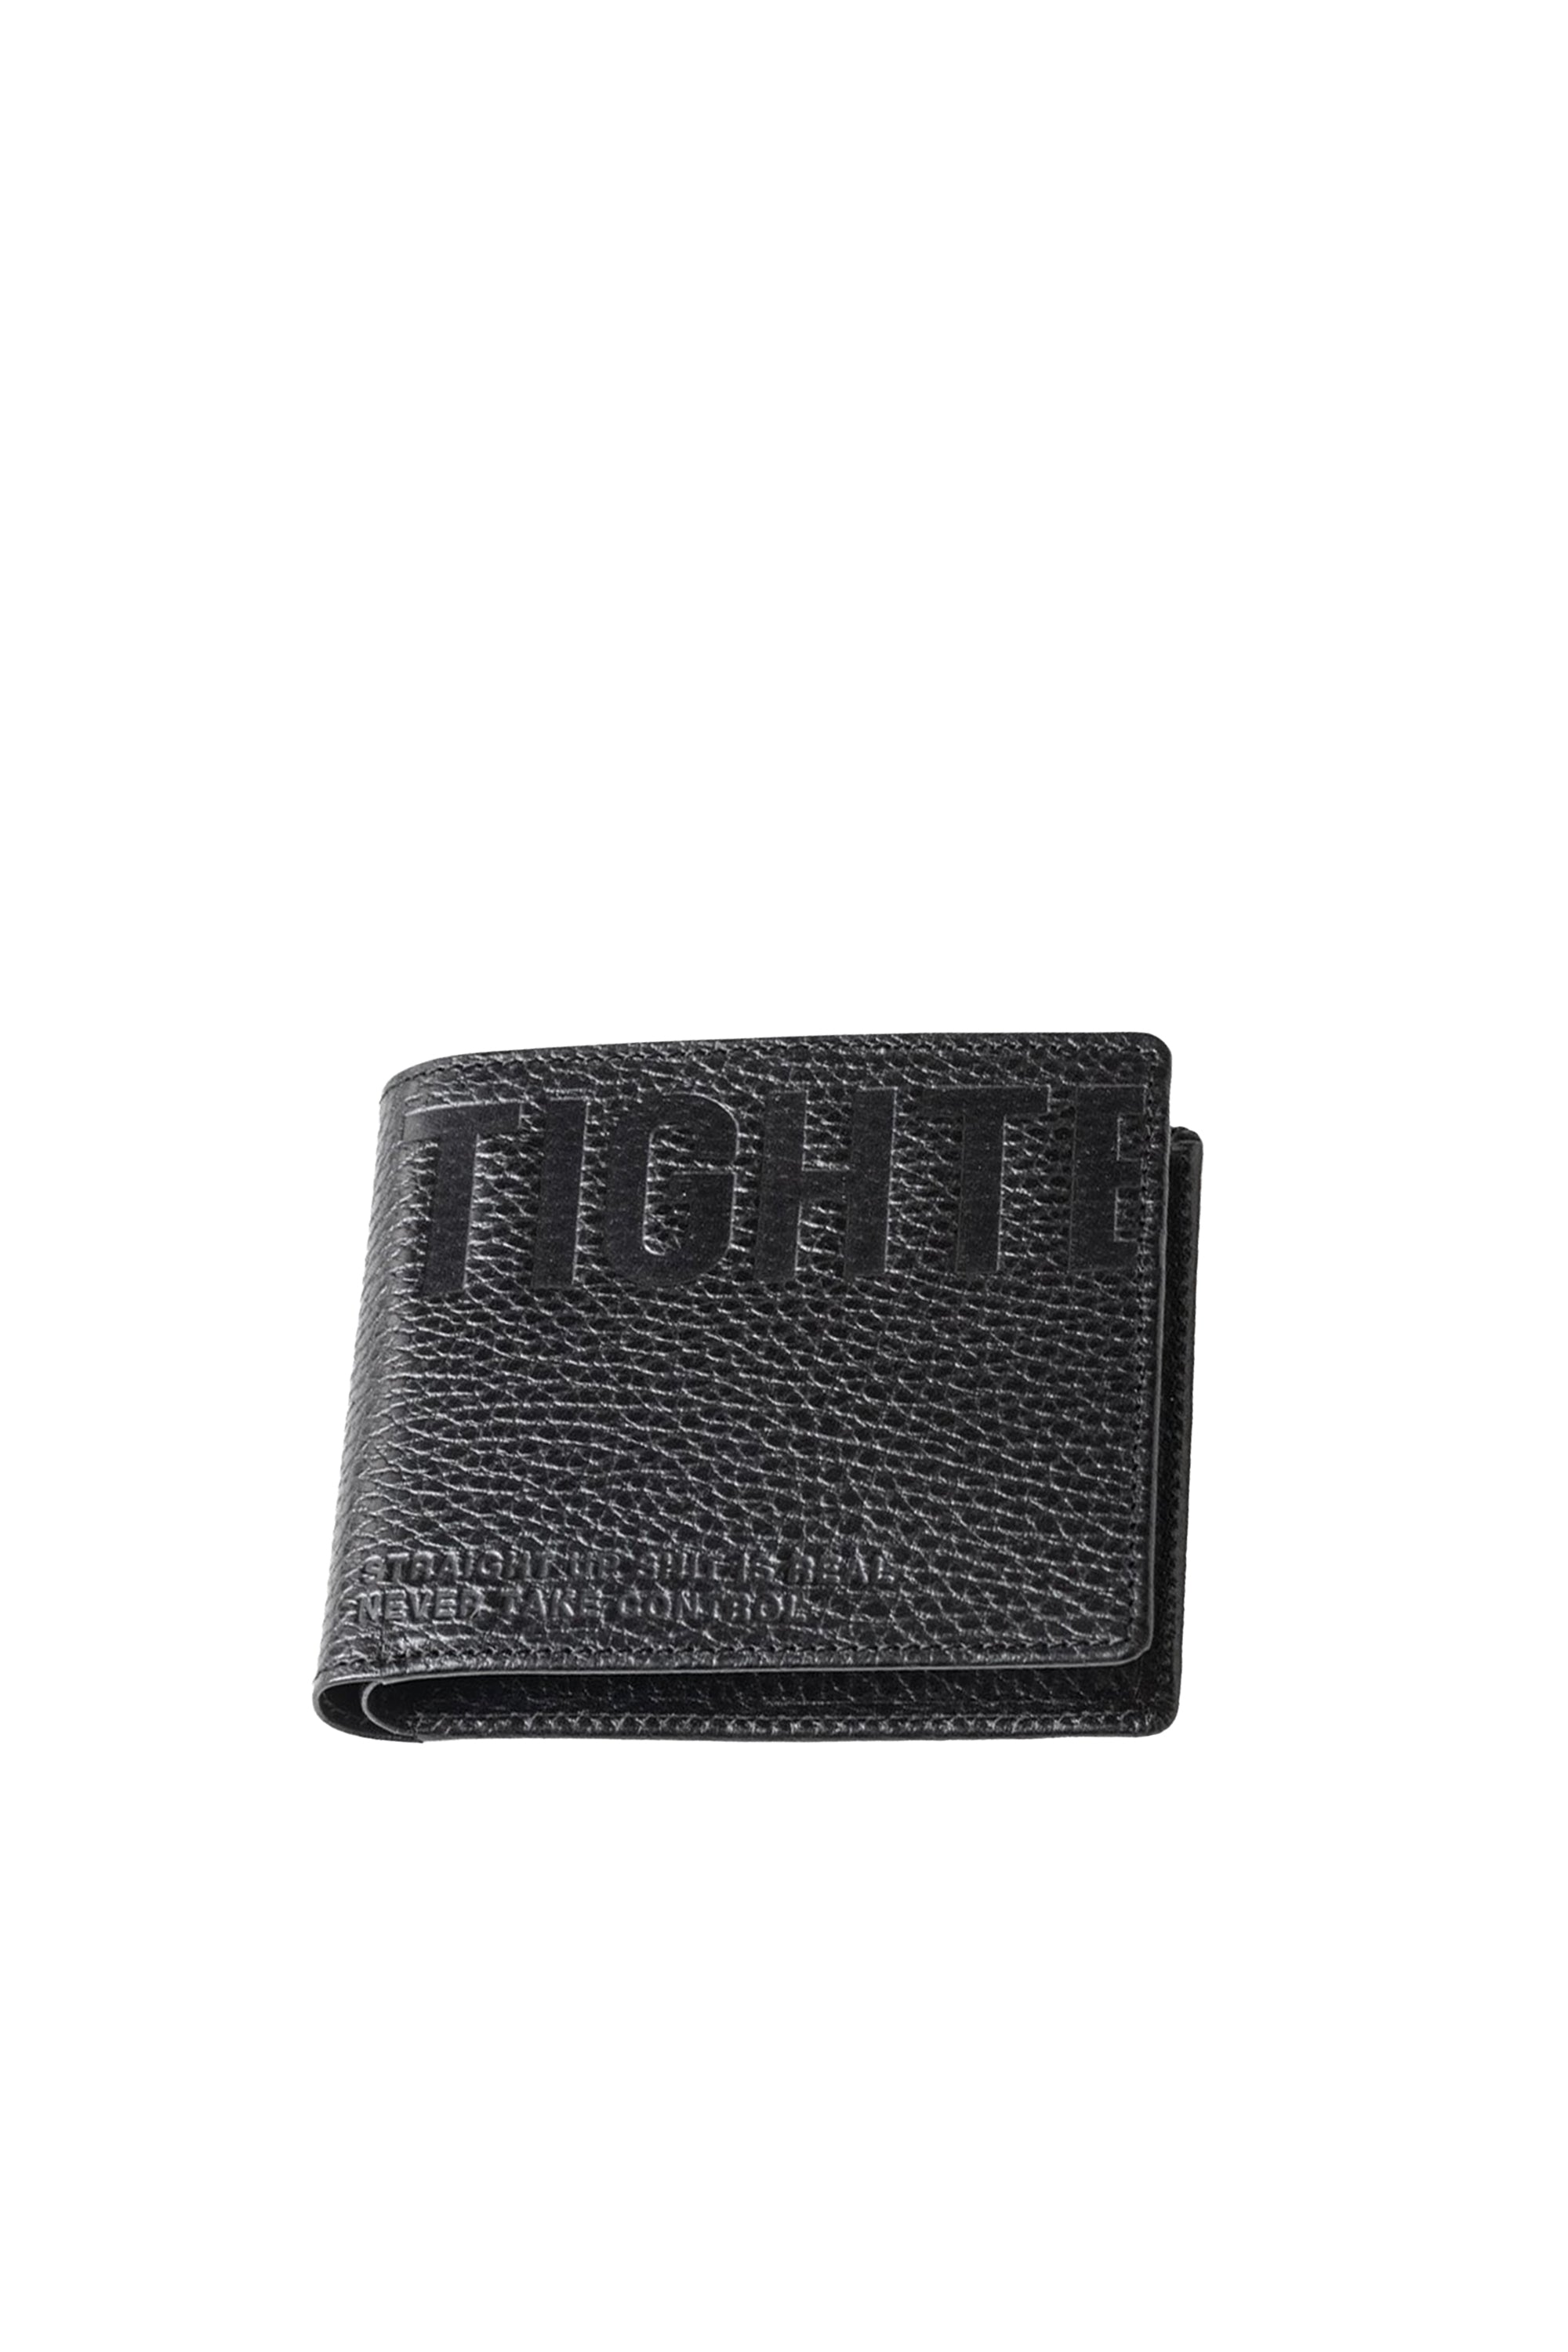 TIGHTBOOTH タイトブース FW23 LEATHER BIFOLD WALLET / BLK -NUBIAN